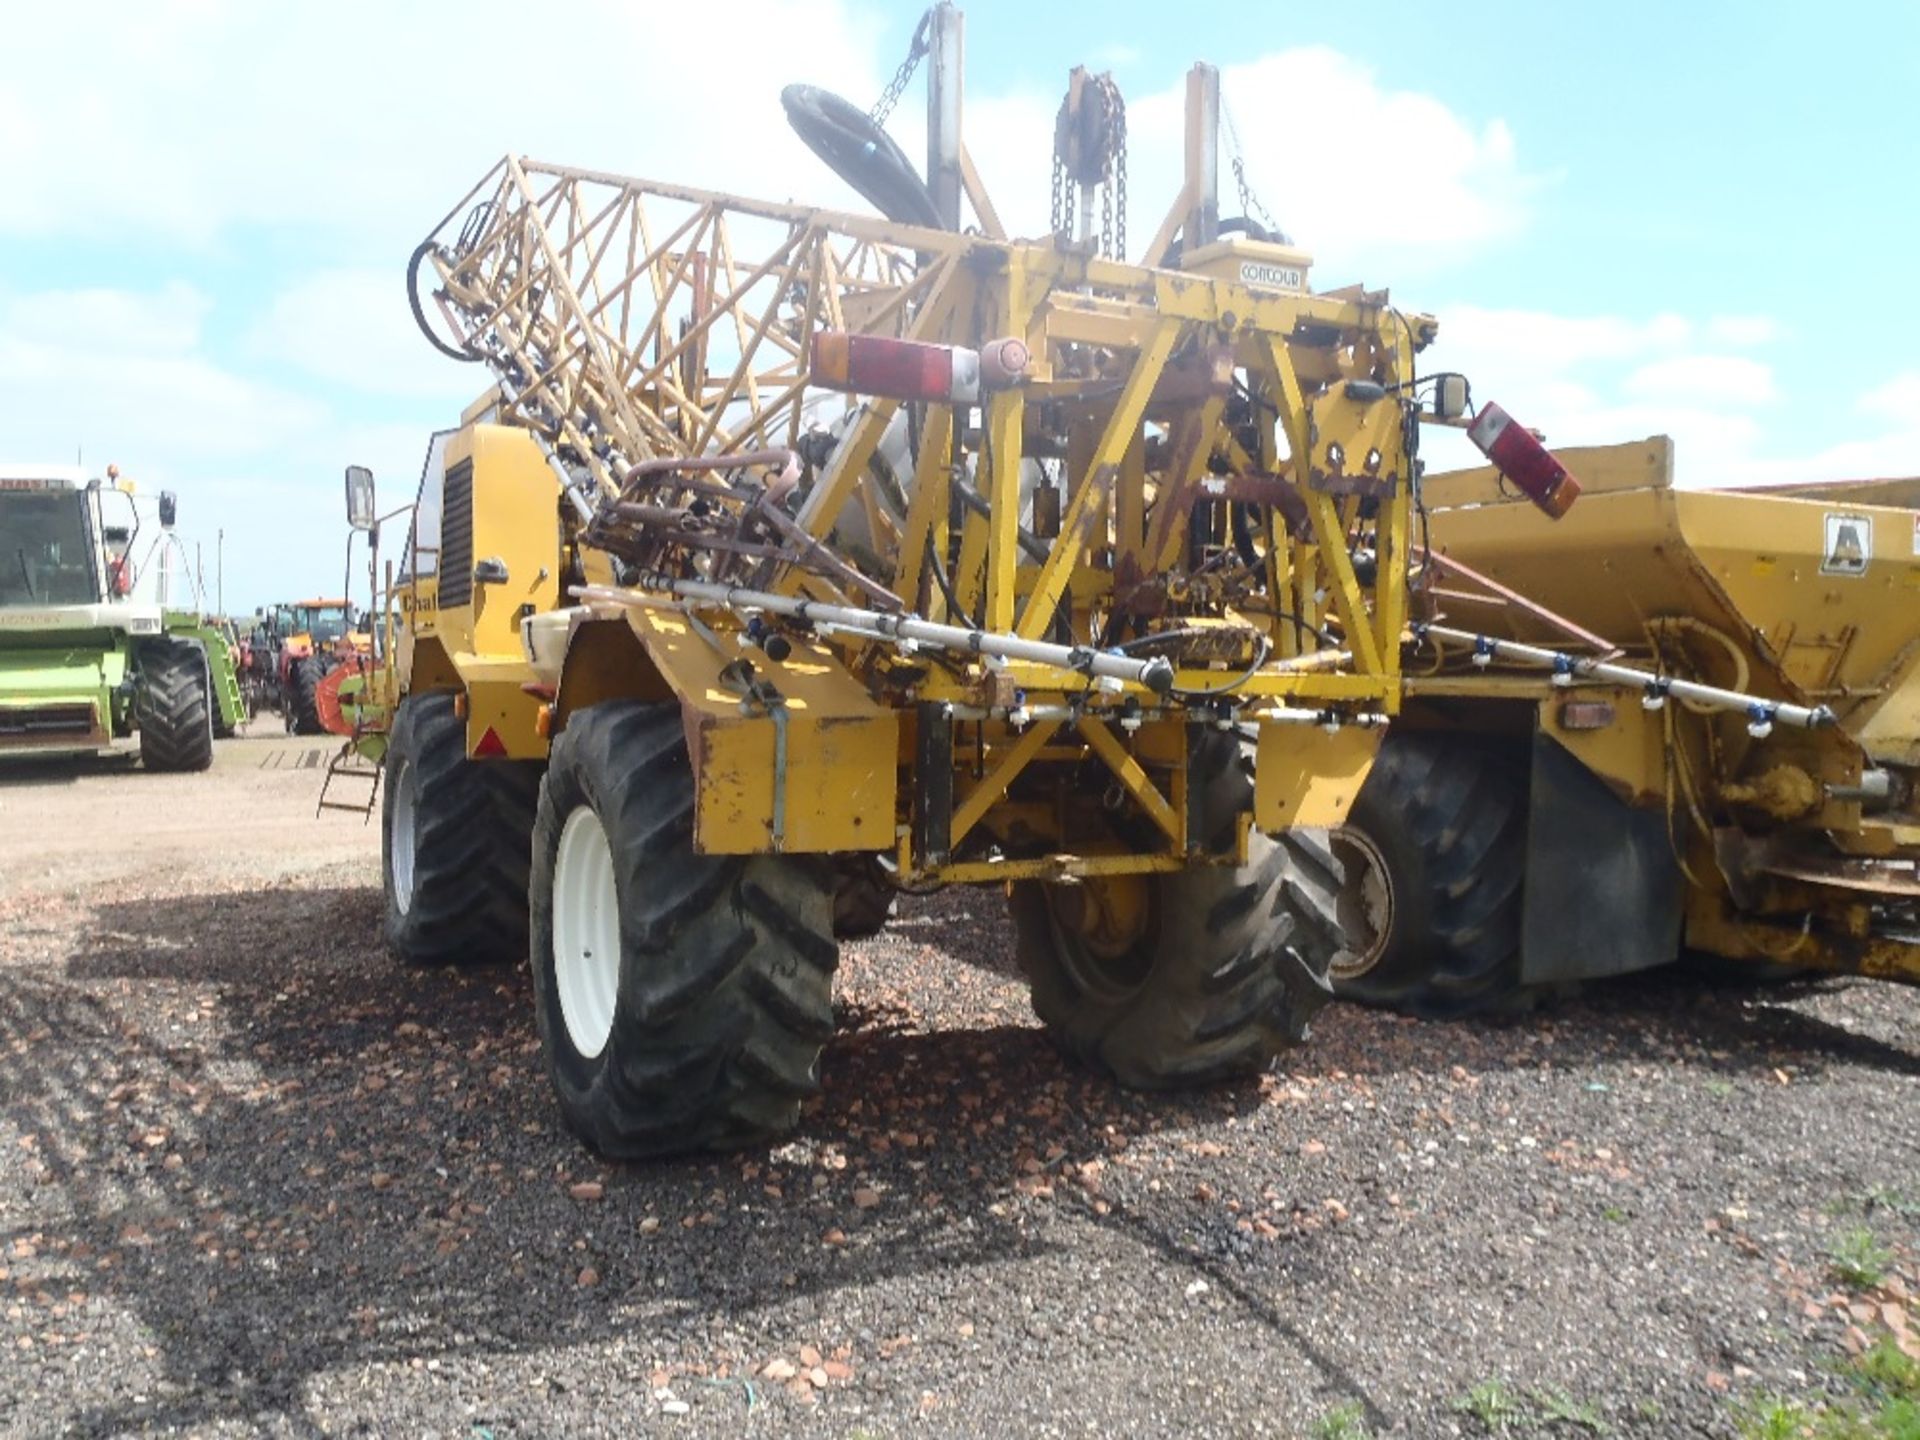 Chafer SSV 4x4 Articulated Self Propelled 24m Sprayer. V5 will be supplied. Reg.No. G488 NKY - Image 3 of 5